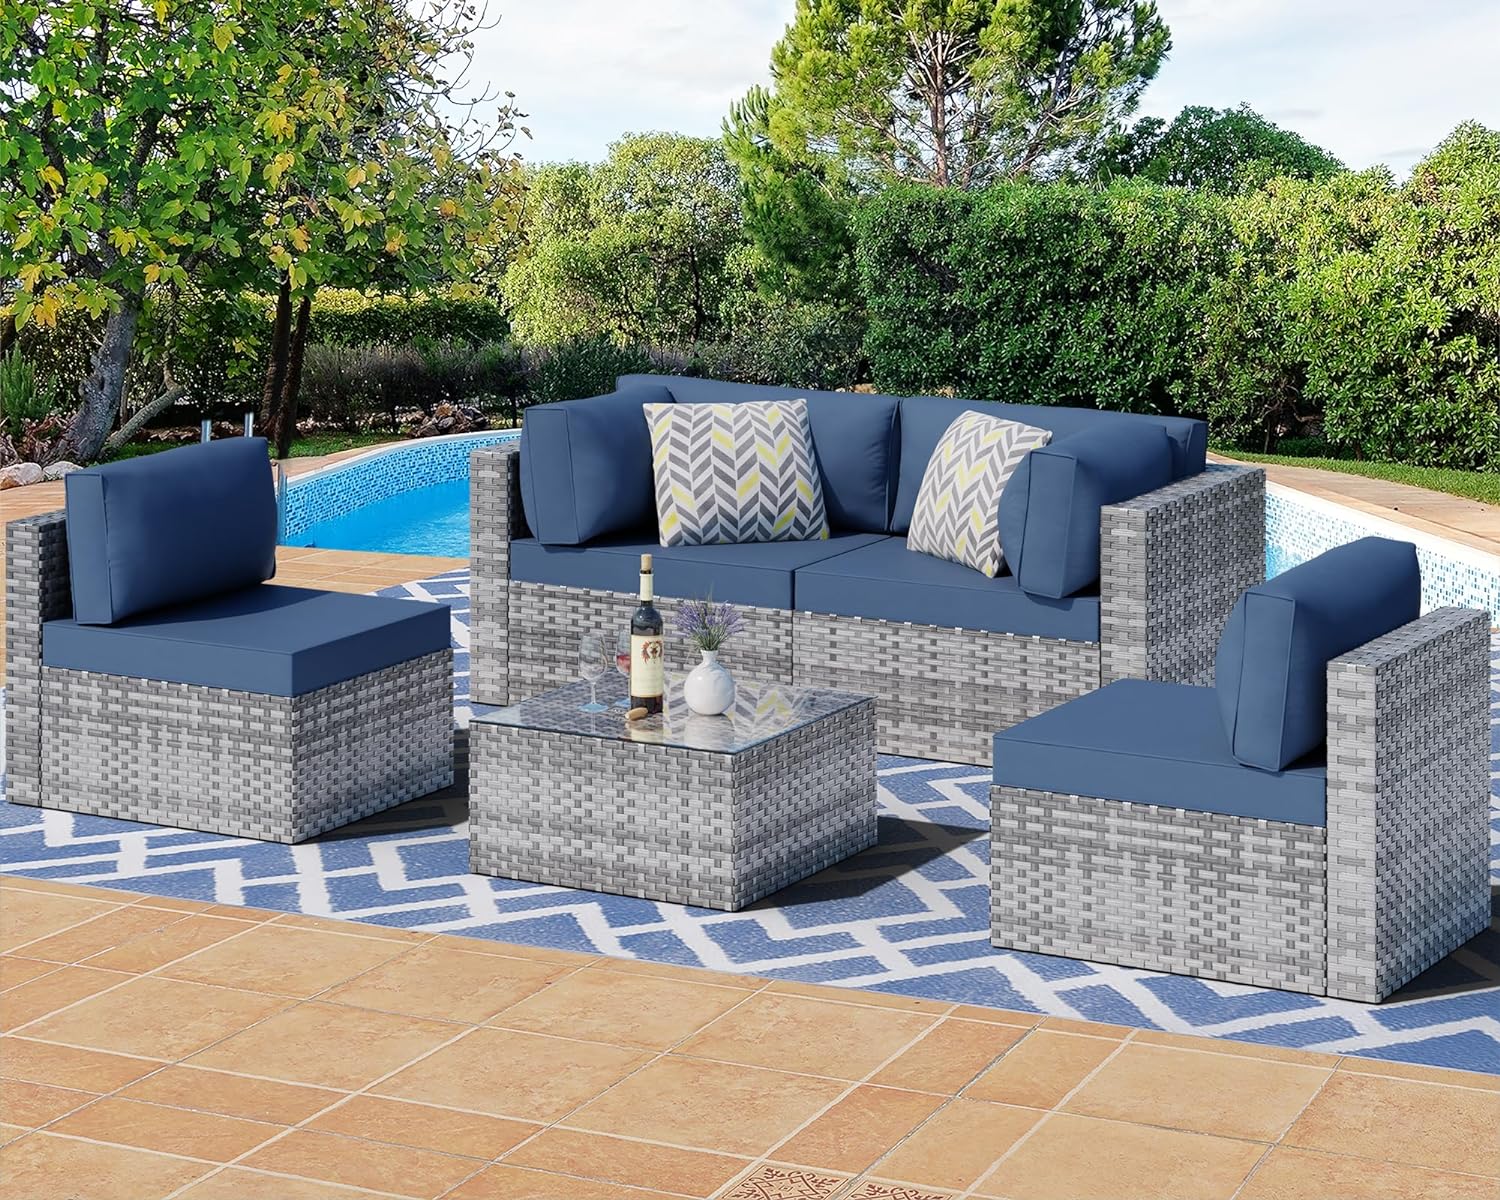 Best Garden Furniture: Transform Your Outdoor Space with Style